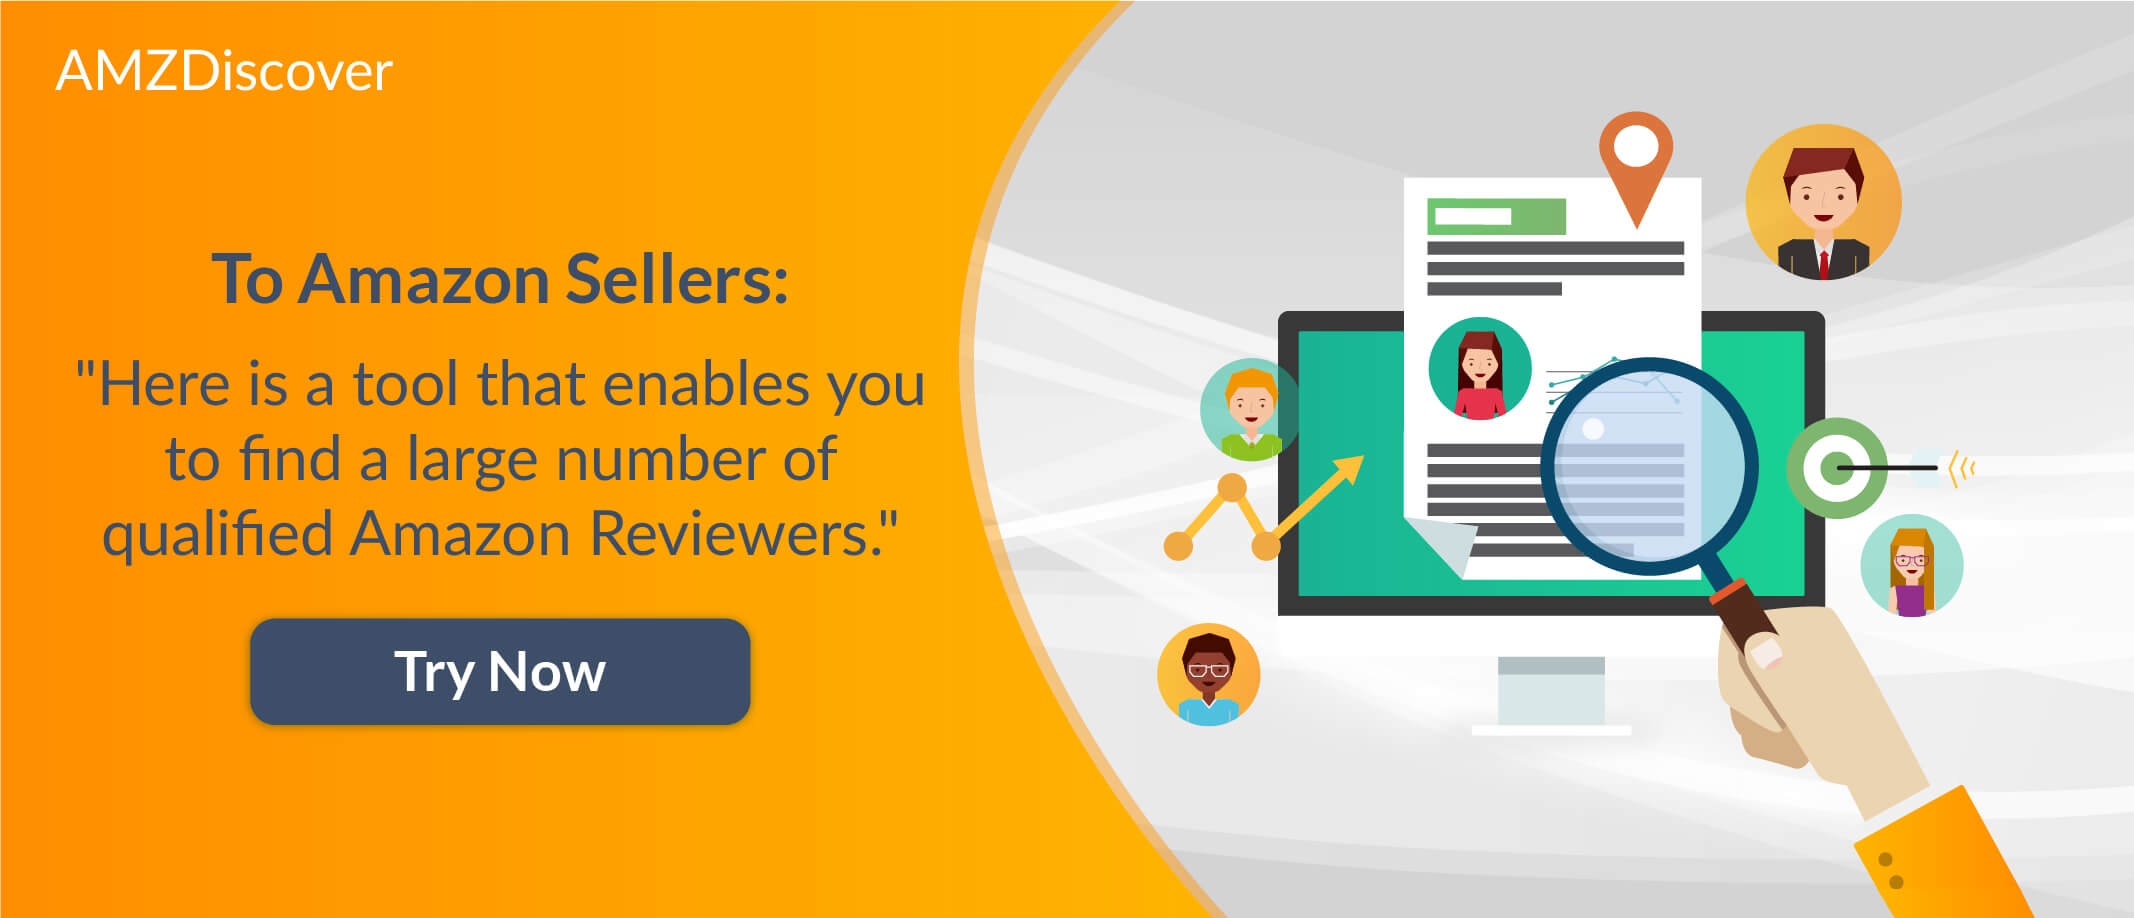 amzdiscover- how to find reviewers